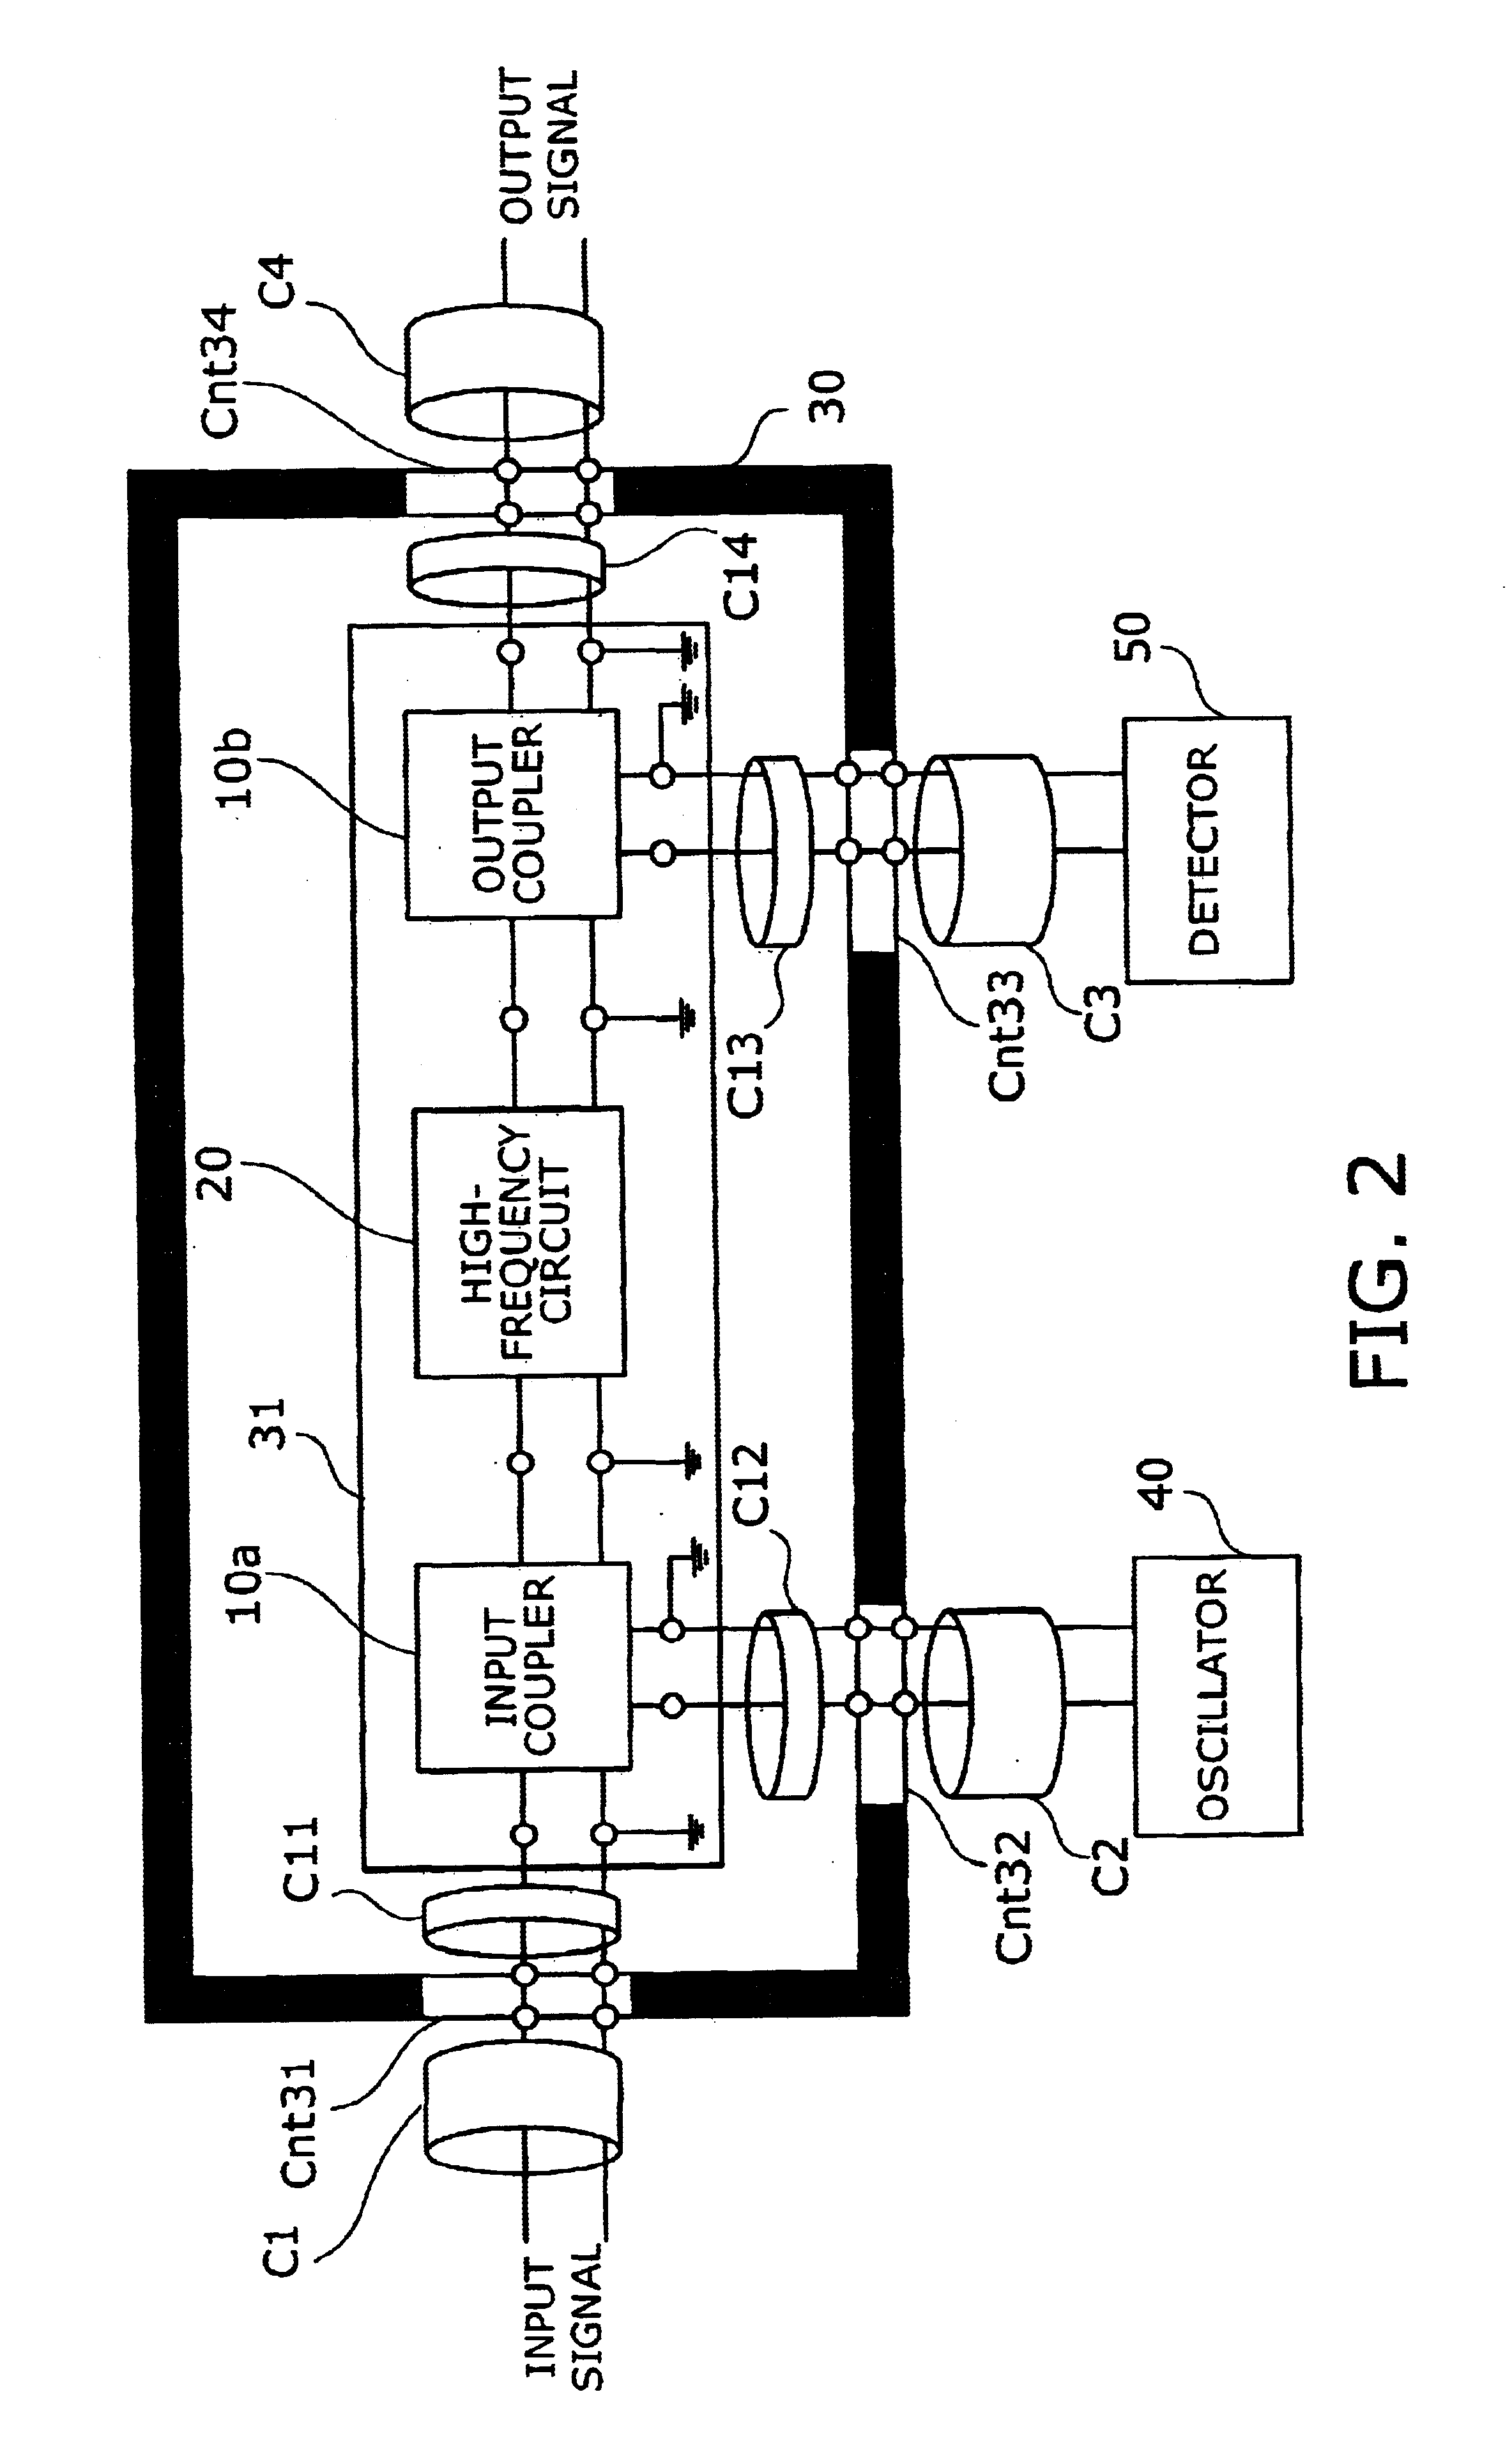 System and method for monitoring high-frequency circuits